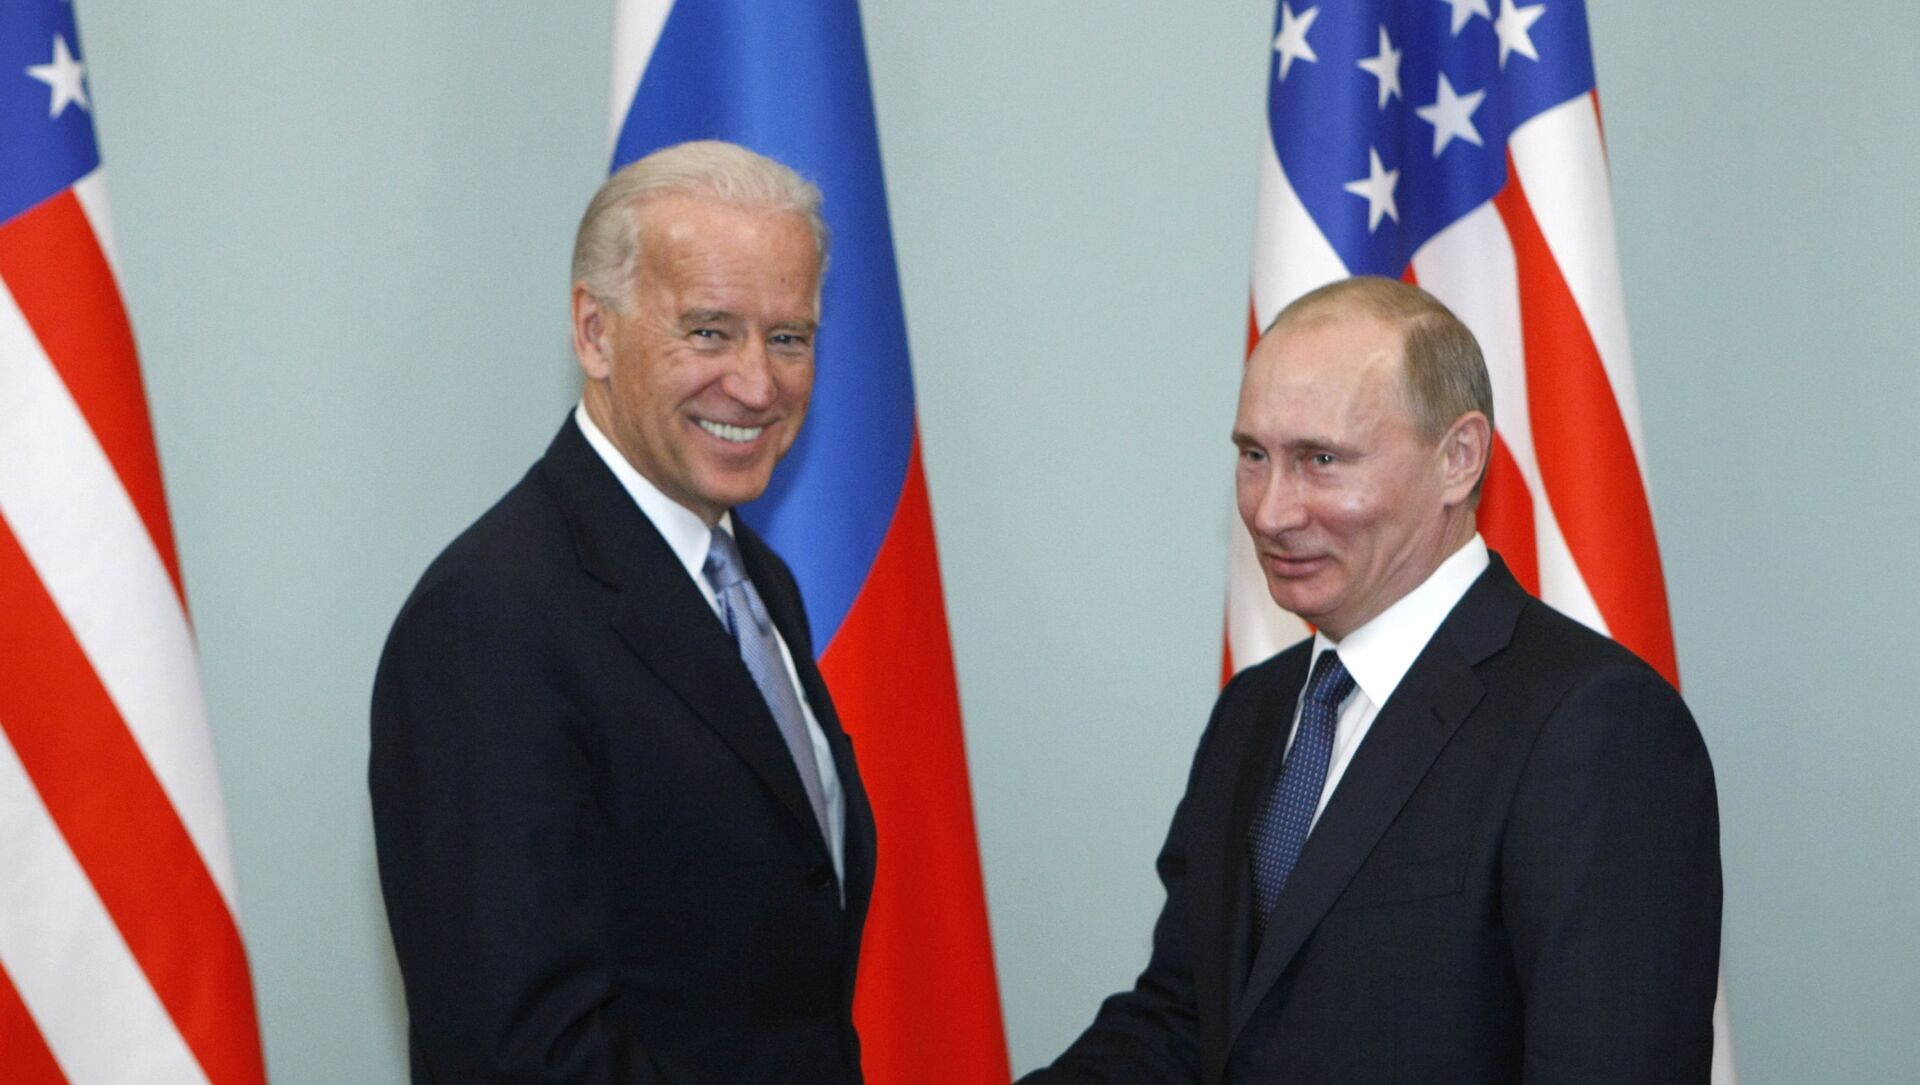 In this March 10, 2011, file photo, Vice President of the United States Joe Biden, left, shakes hands with Russian Prime Minister Vladimir Putin in Moscow, Russia. - Sputnik International, 1920, 19.04.2021